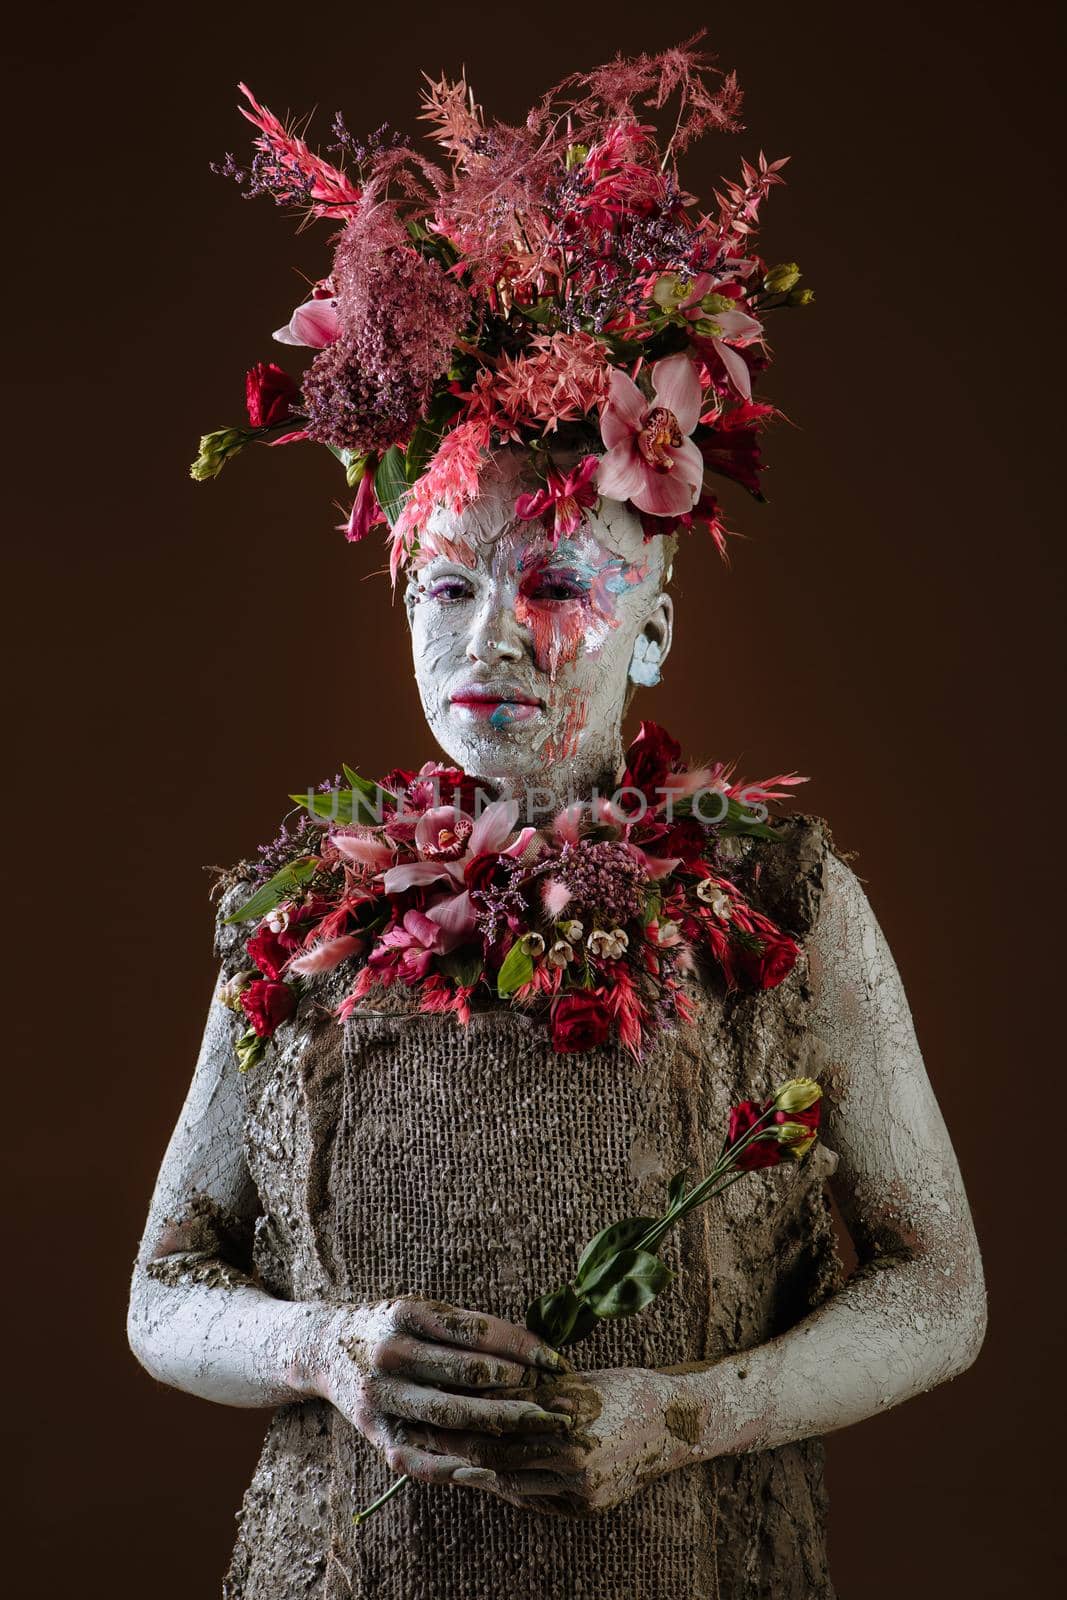 A girl smeared with clay in a cemented dress. The model has a headdress made of flowers. by deandy